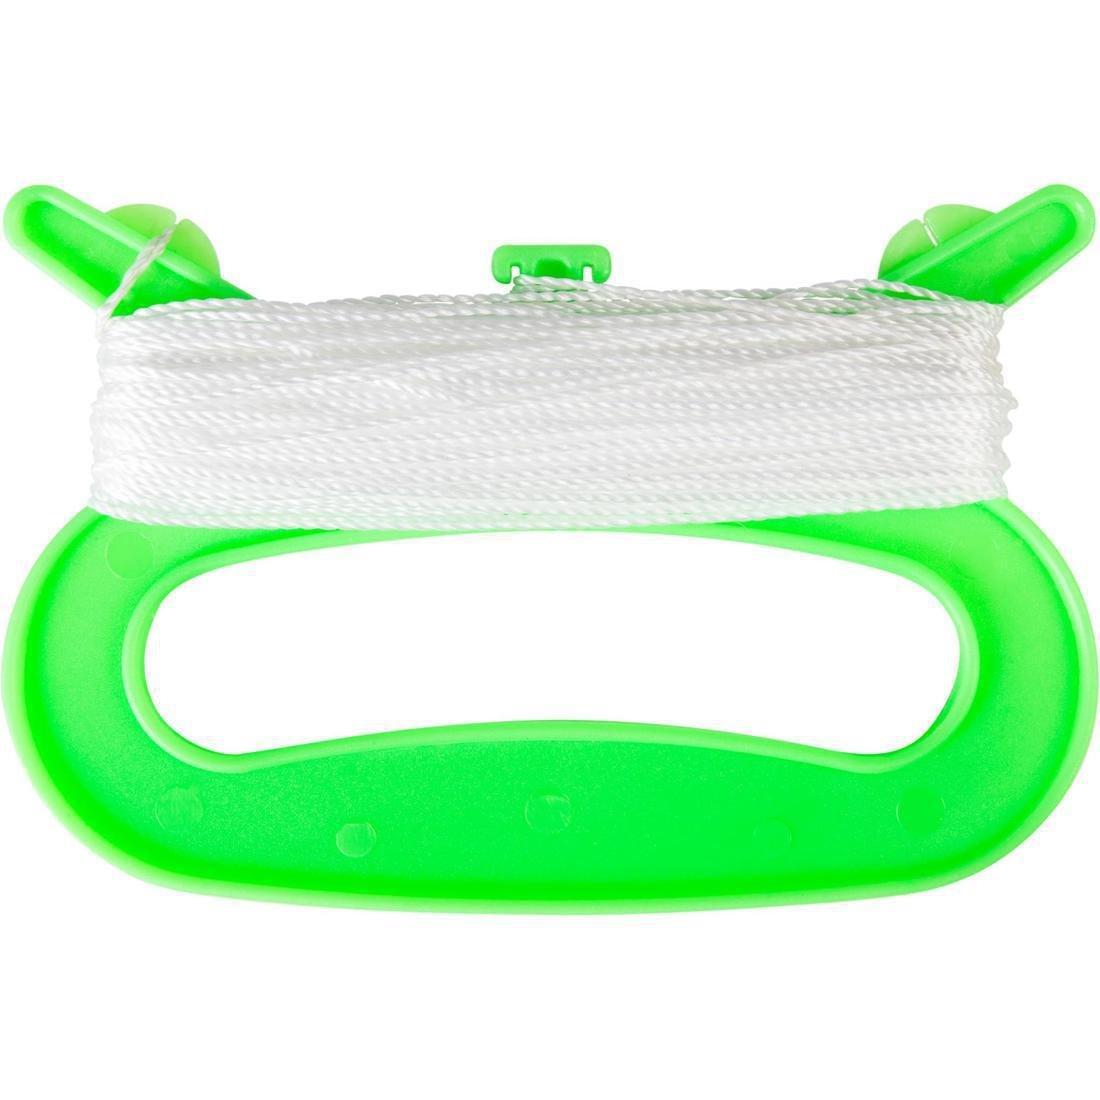 ORAO - Static Kite Handle With Line, Green